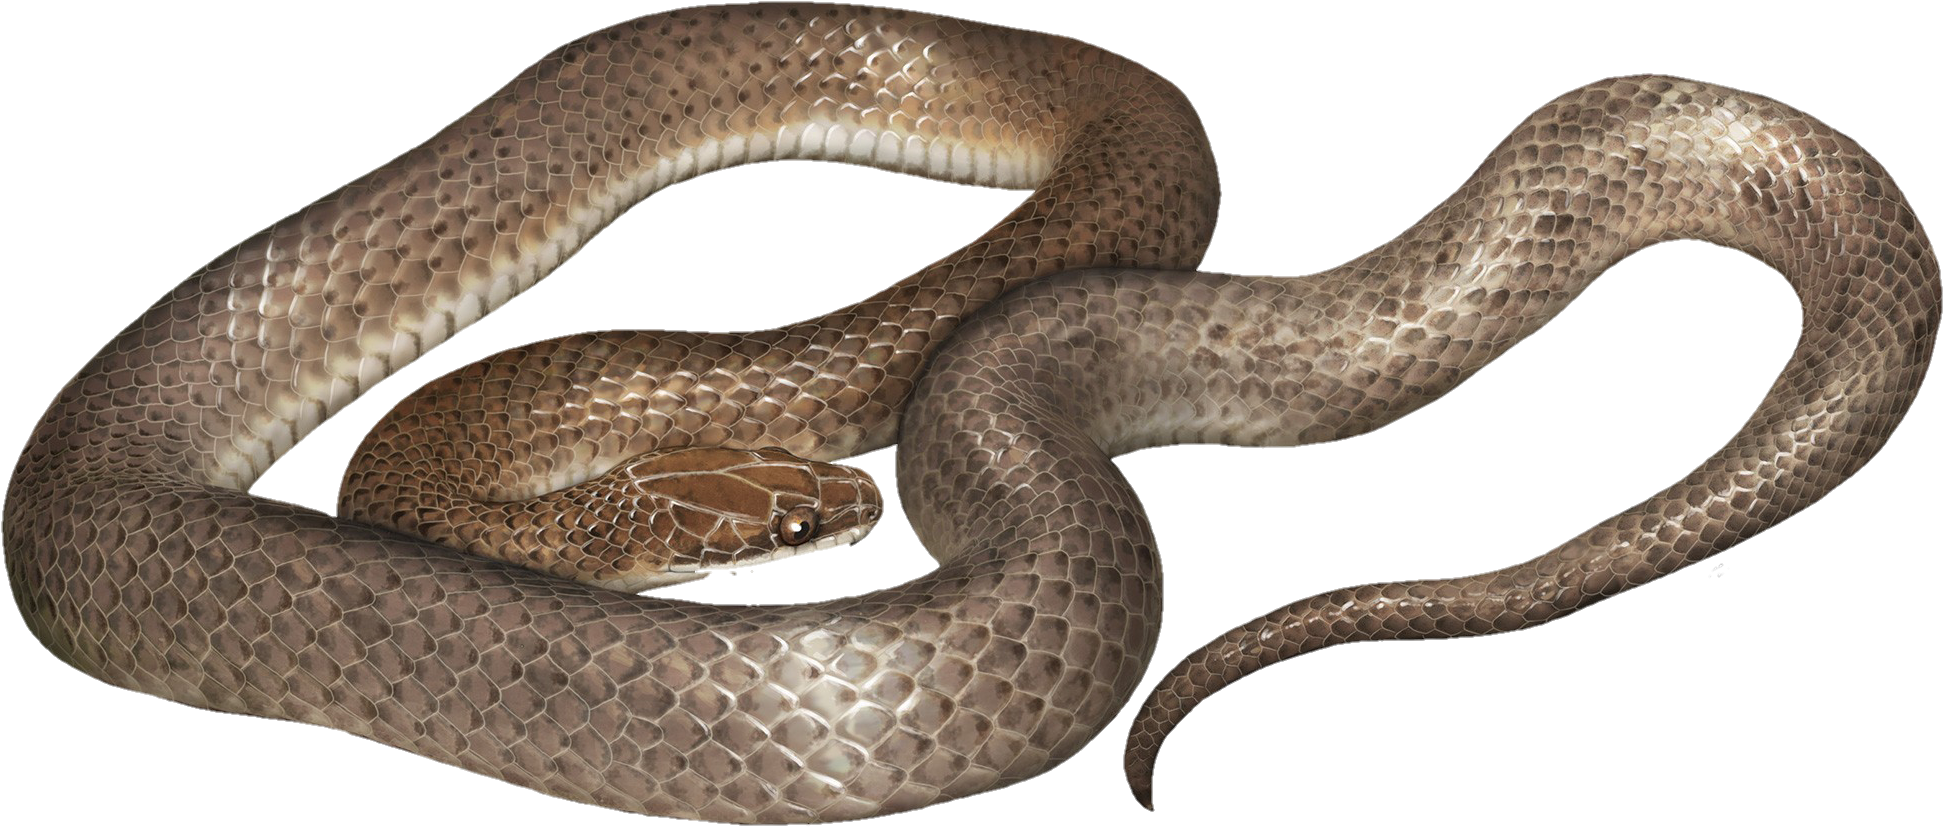 snake-png-image-pngfre-4